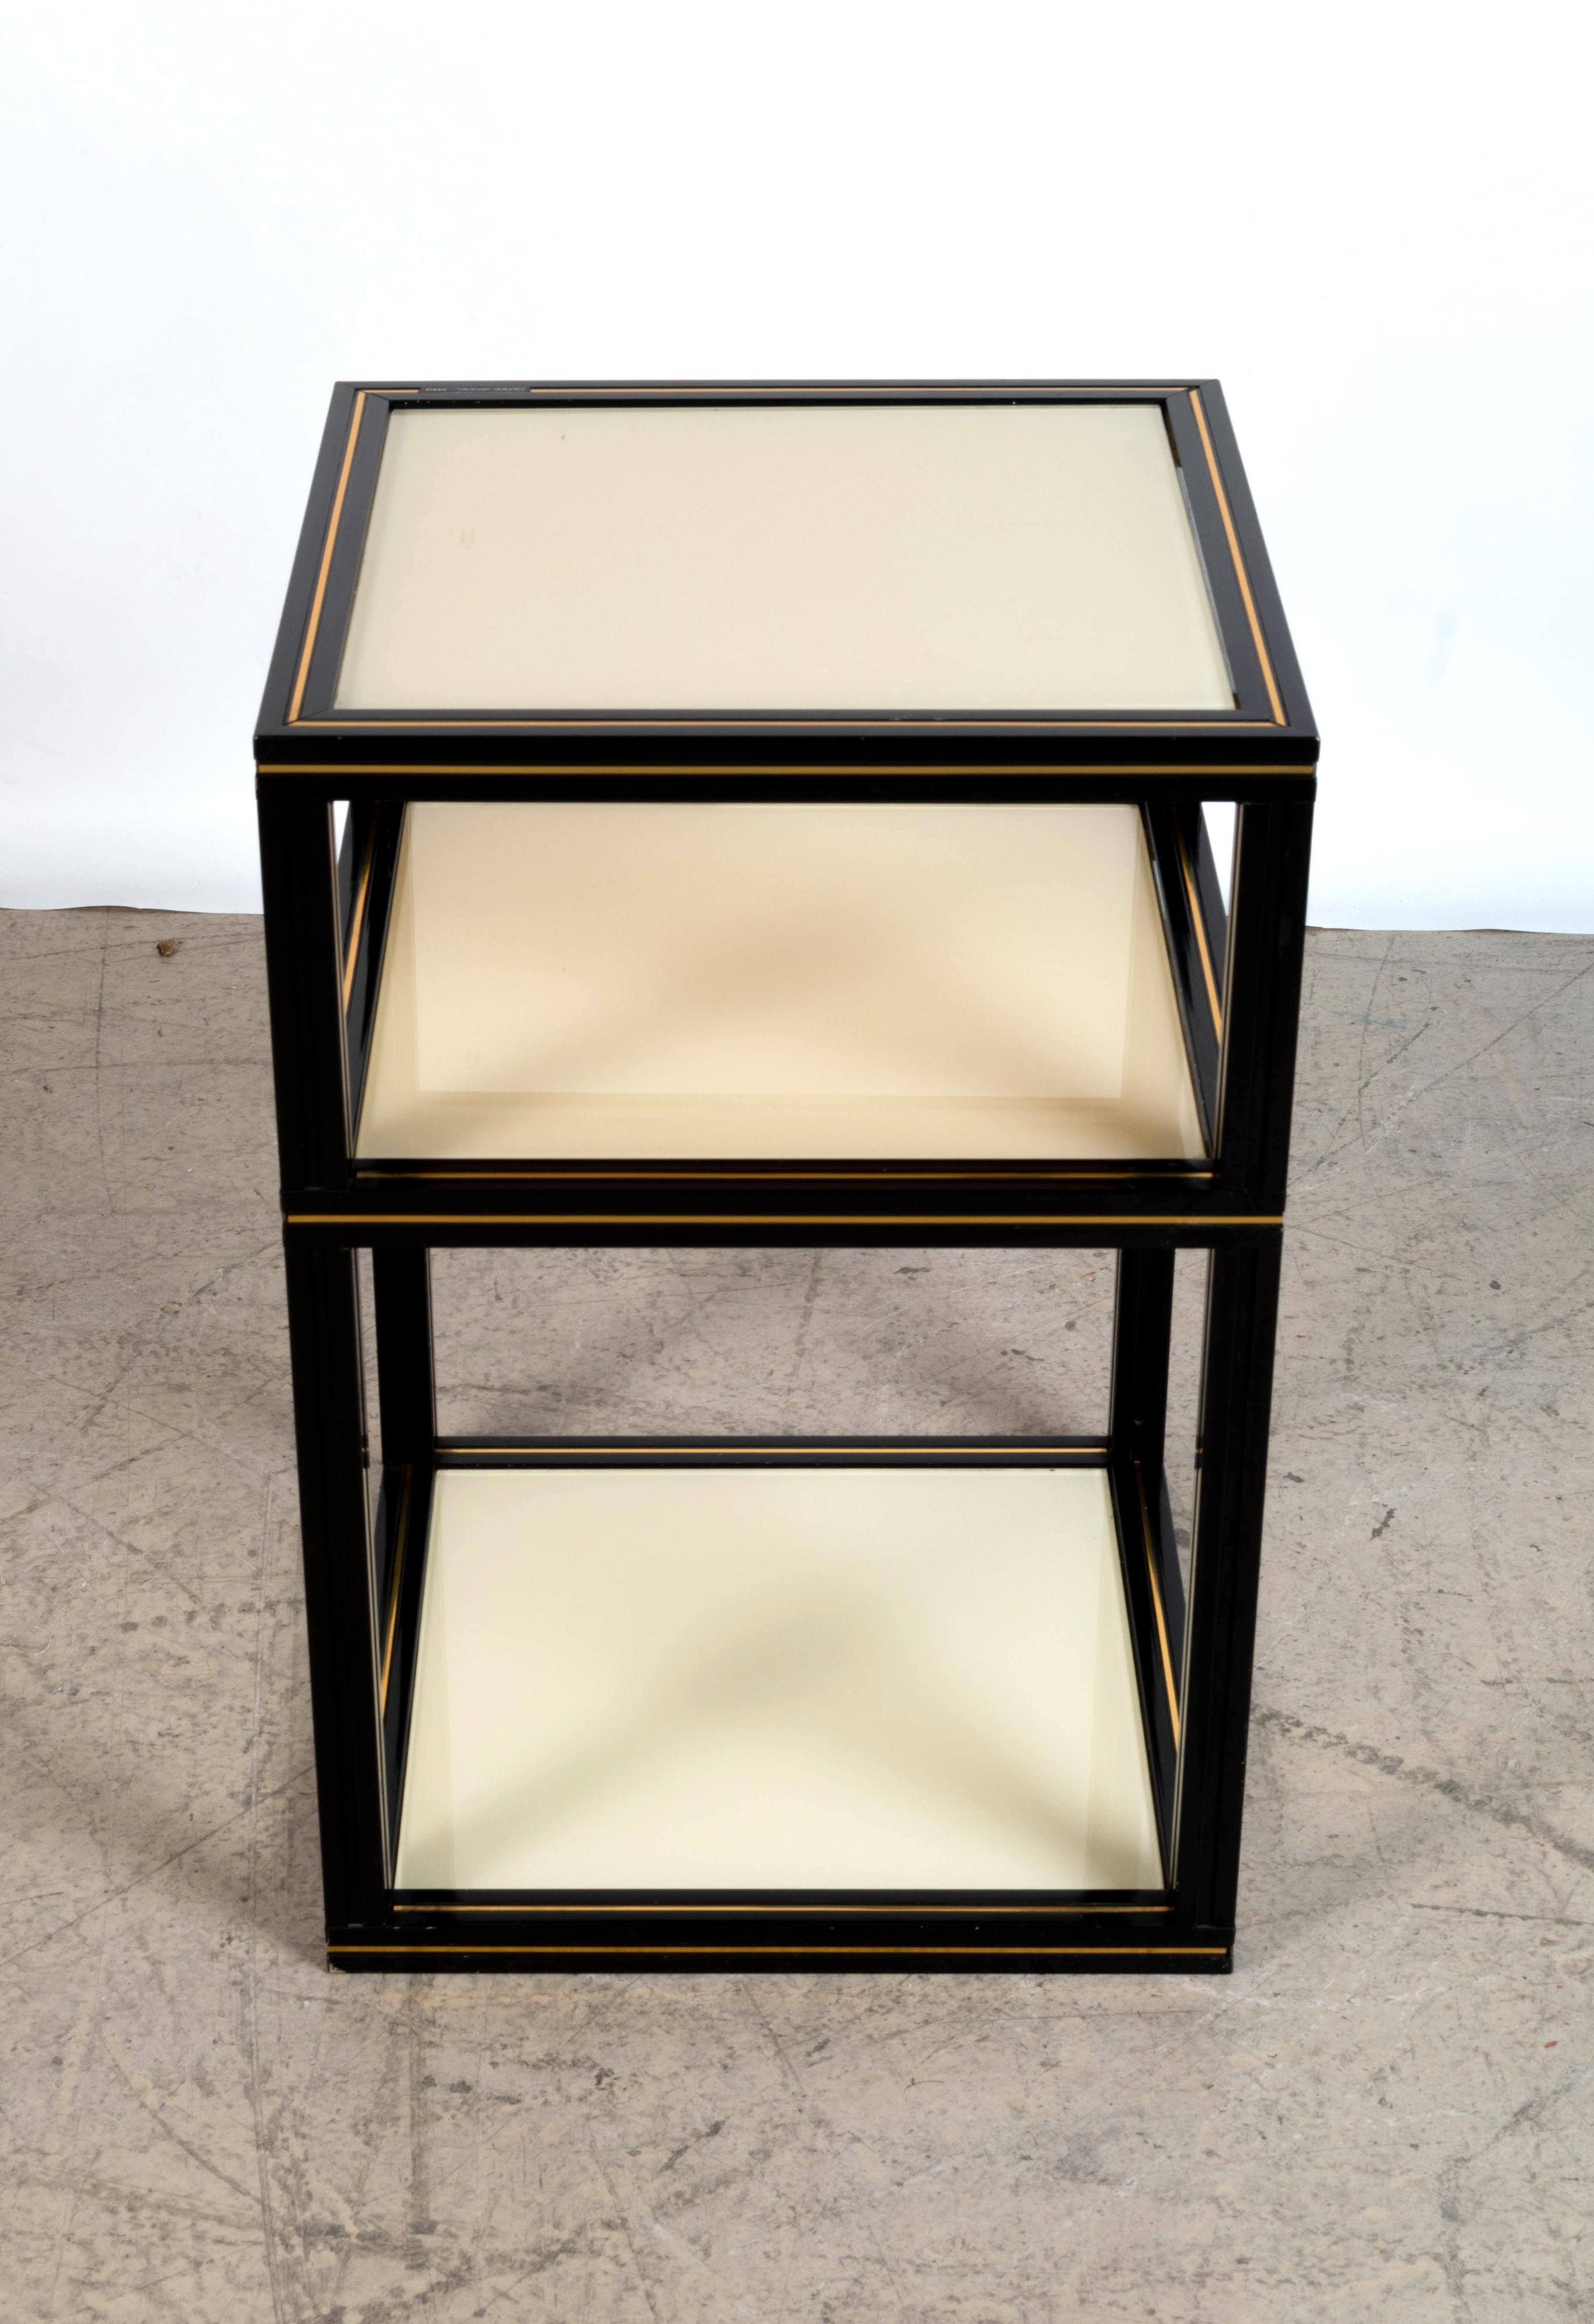 French mid-century Etagere lacquered side table By Pierre Vandel, Paris C.1970

Black lacquered aluminium frame with cream opaque glass. 
Signed Pierre Vandel, Paris.
In excellent vintage condition.